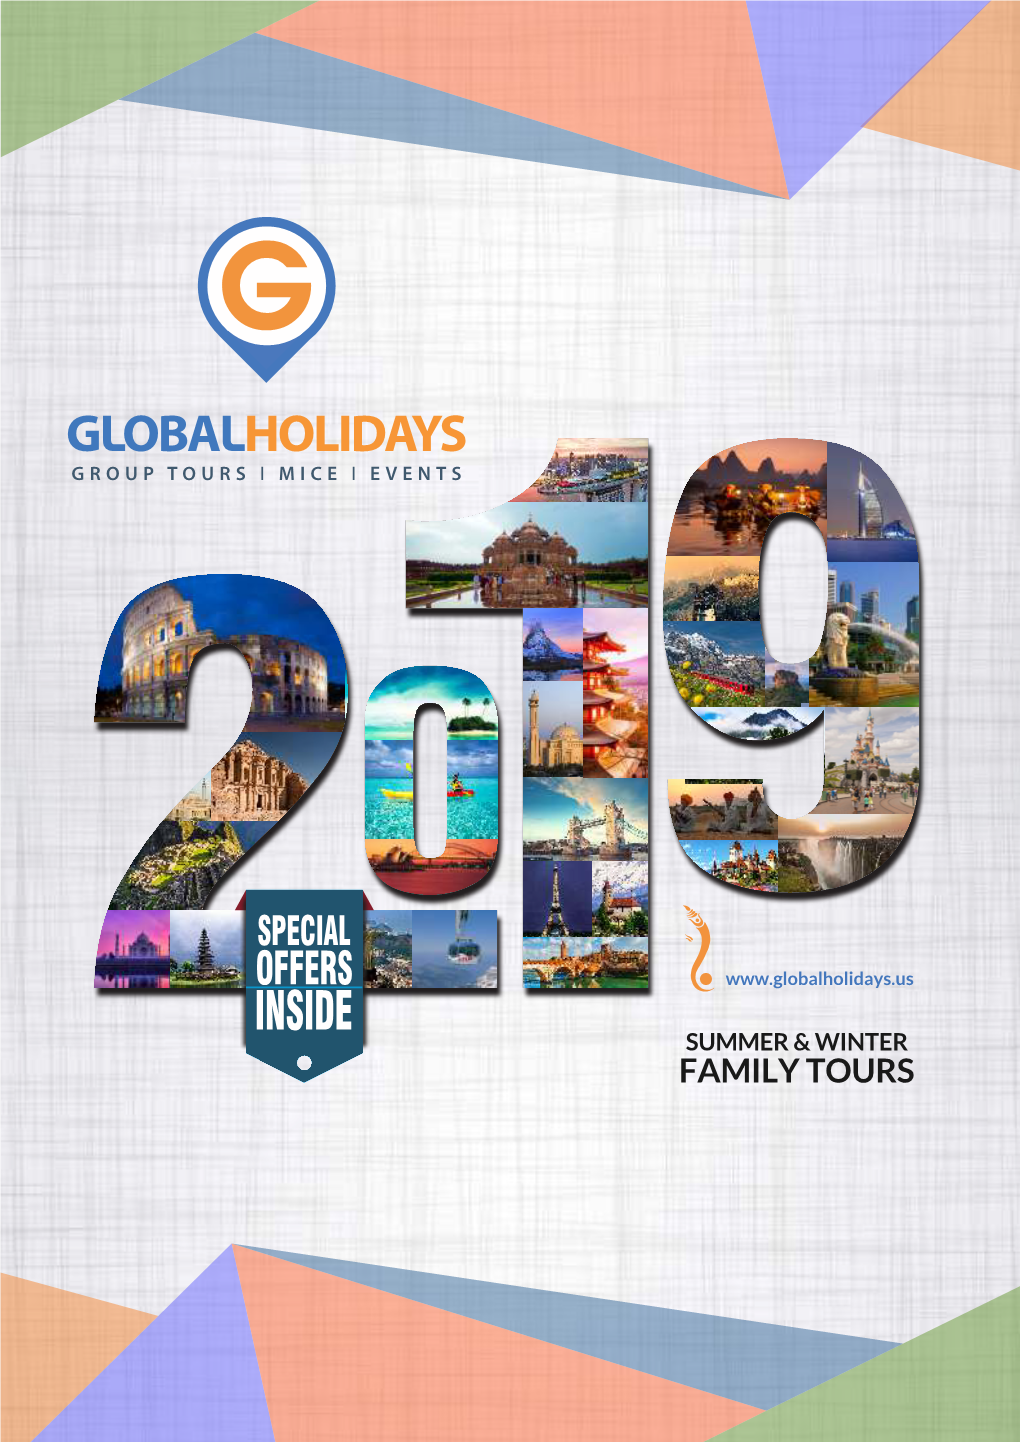 INSIDE SUMMER & WINTER FAMILY TOURS Our Team Here at Global Holidays Has a Motto of Giving a Hundred Percent Satisfaction Service to Our Customers